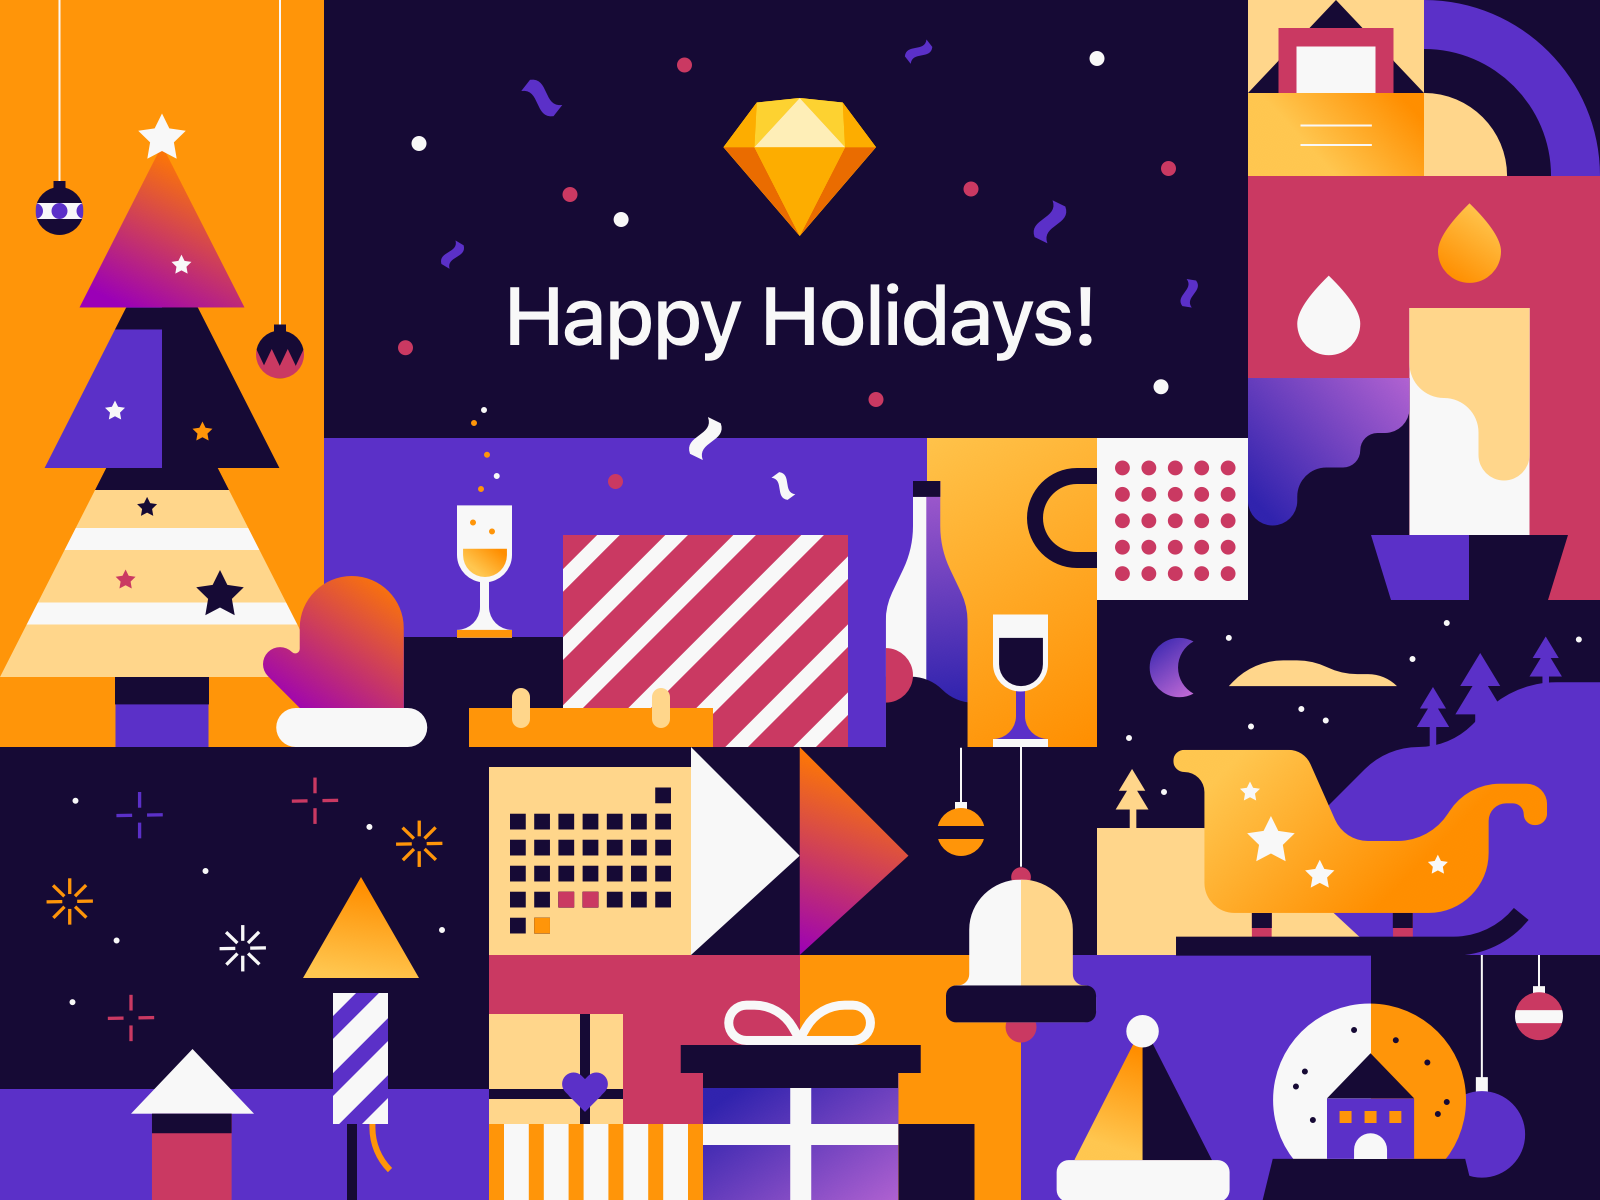 Pure Inspiration: A roundup of Inbox UI, Holidays and more